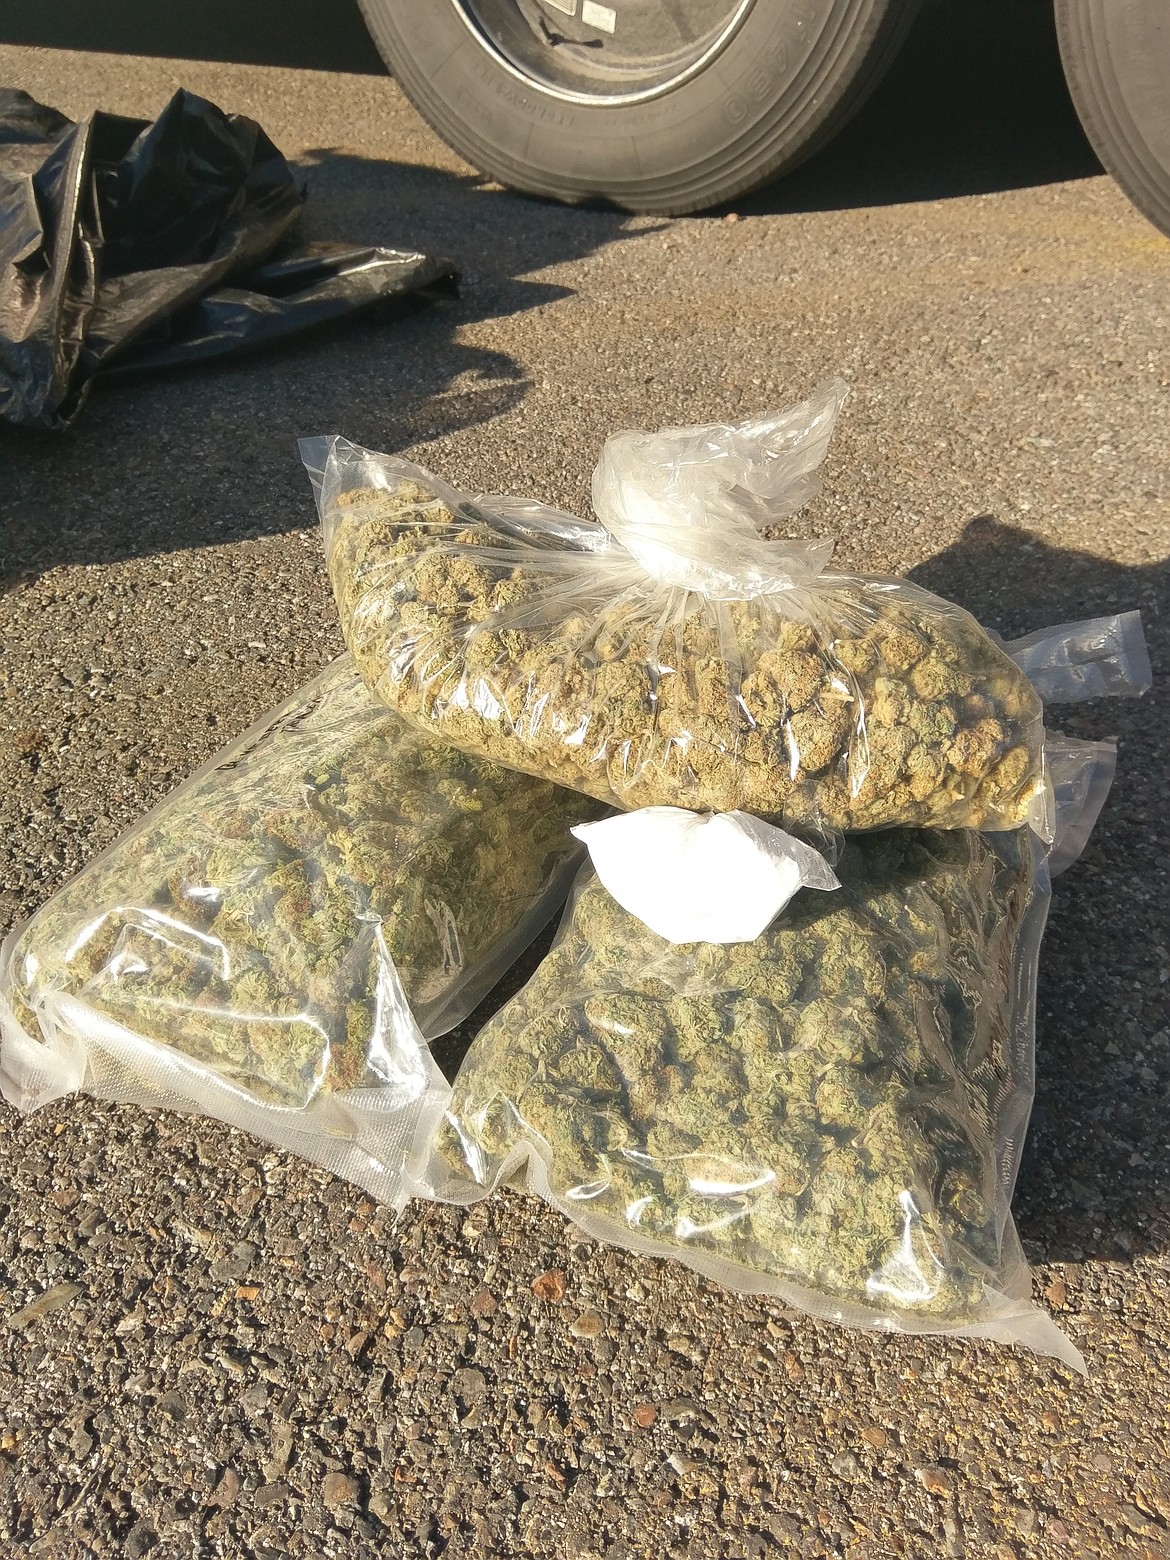 The seized cocaine can be seen atop of one of the larger marijuana busts.